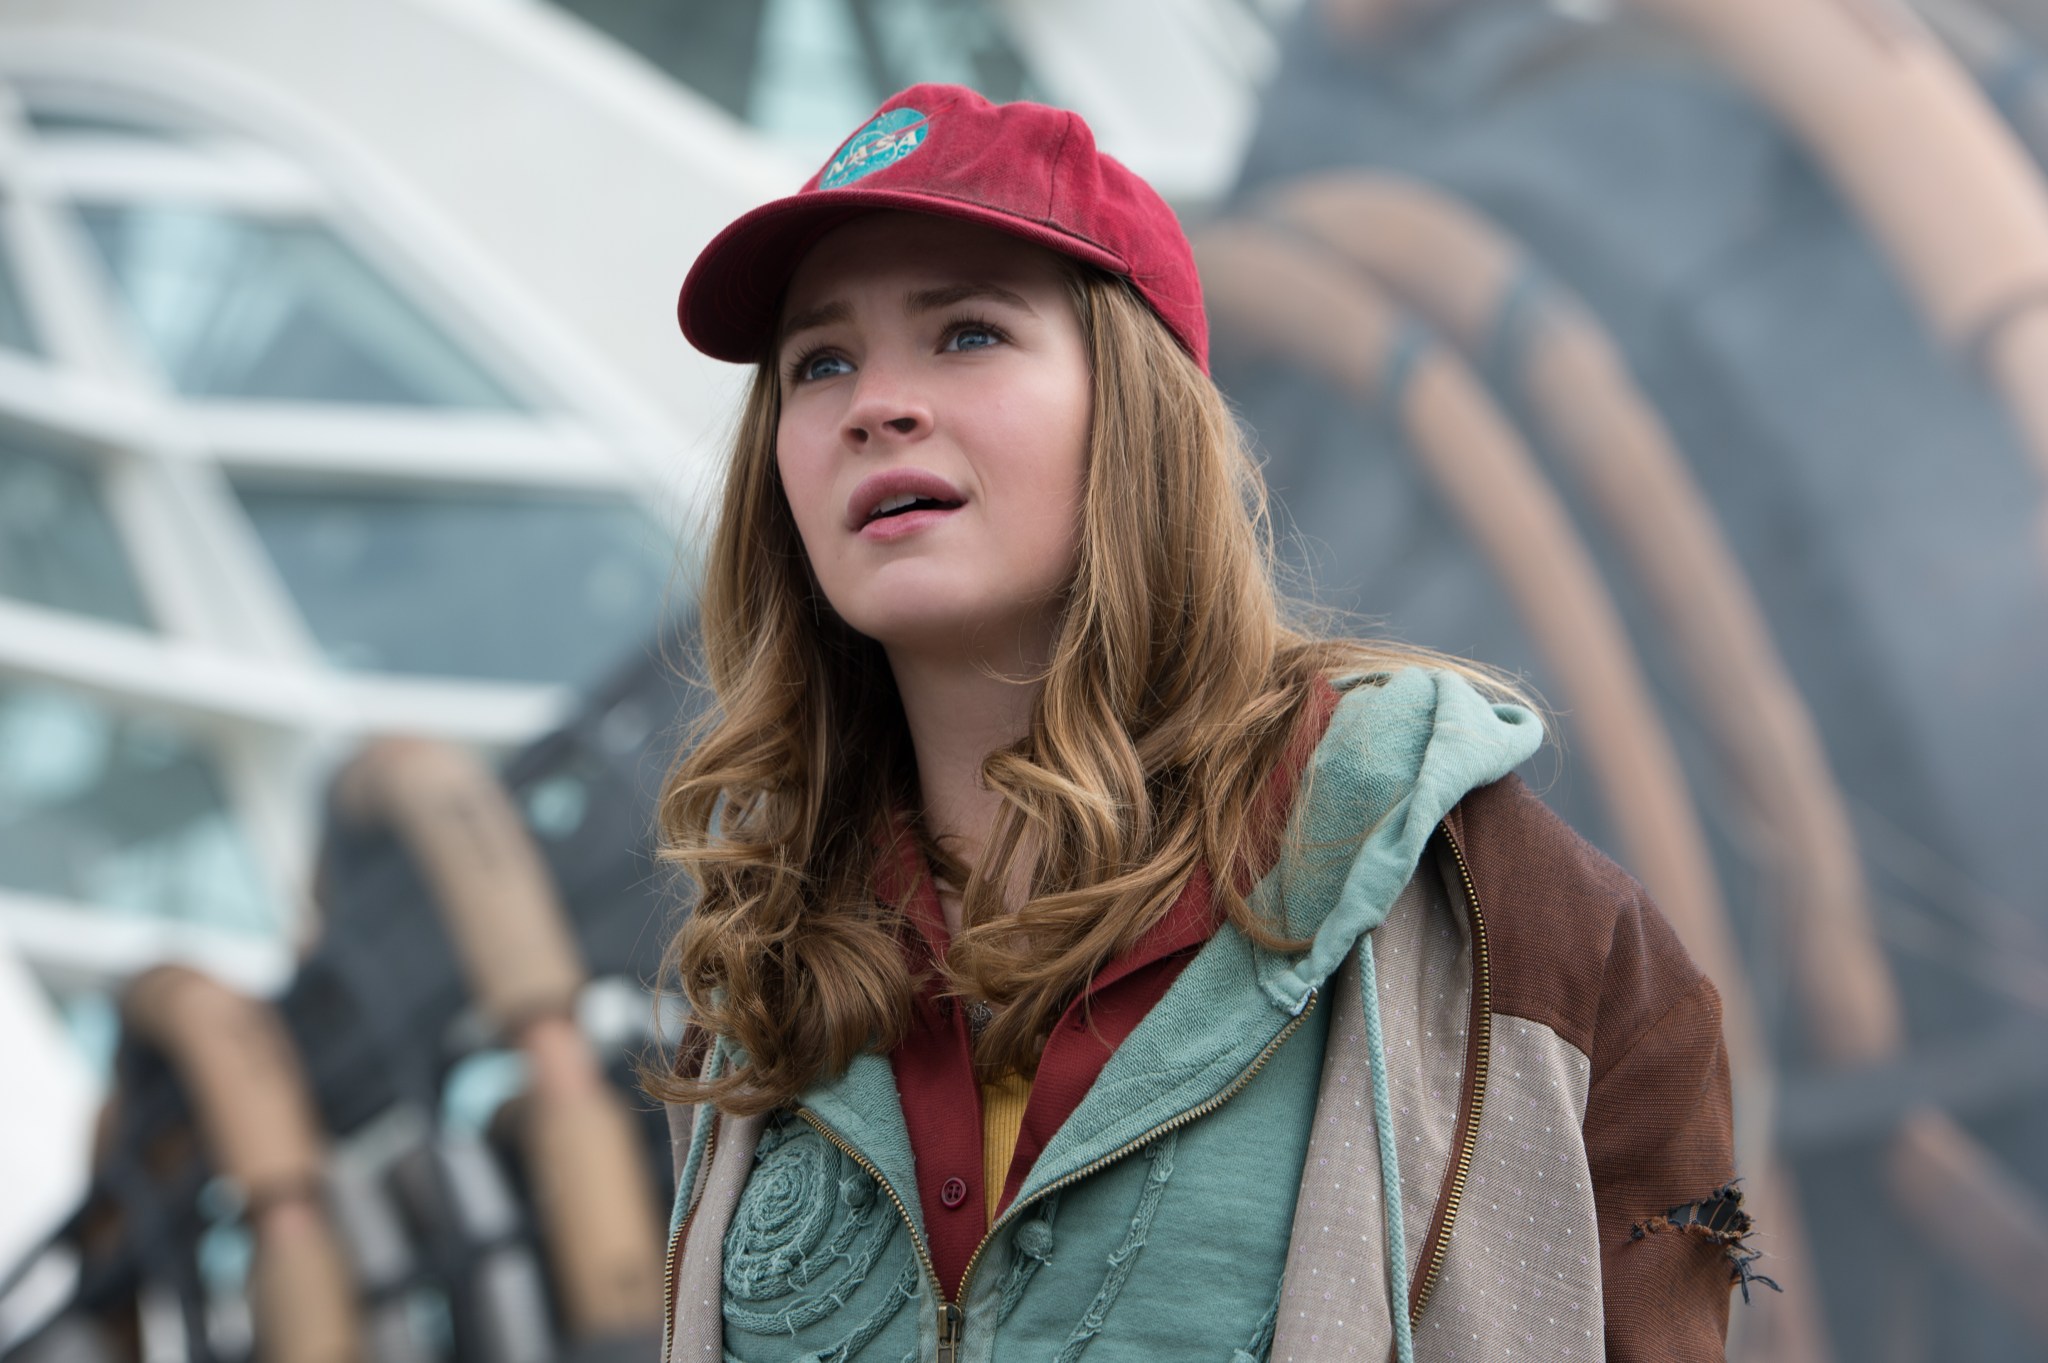 Main character Casey Newton marvels at the wonders of Tomorrowland as portrayed in the film. 